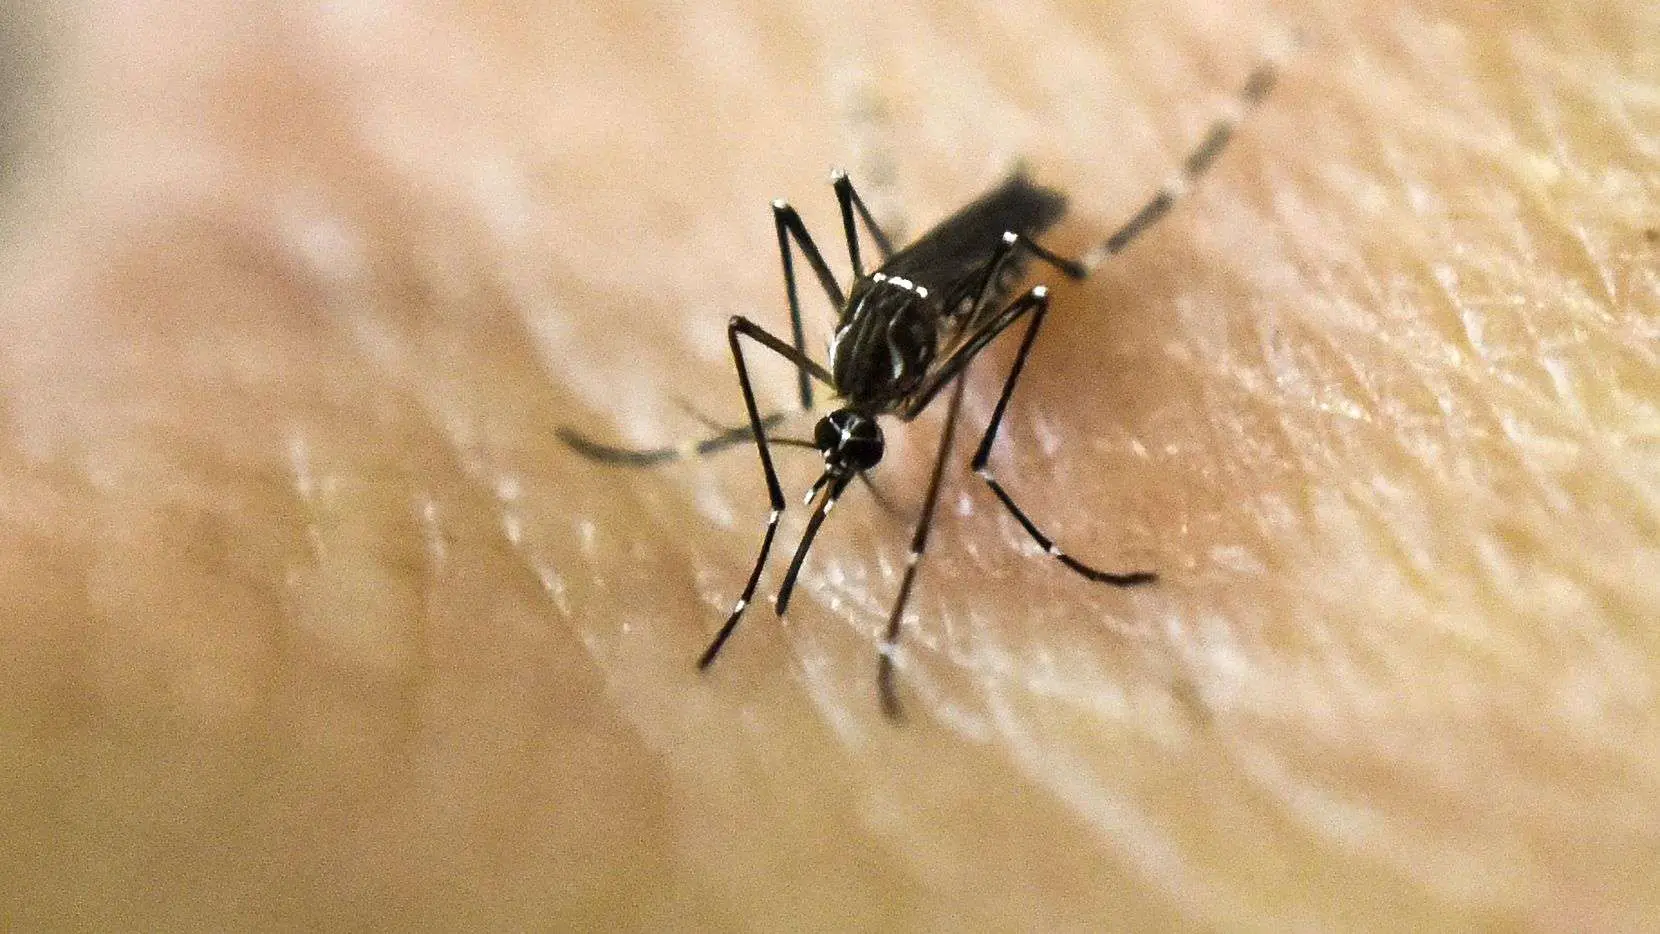 Texas Medicaid to cover mosquito repellent amid growing ...